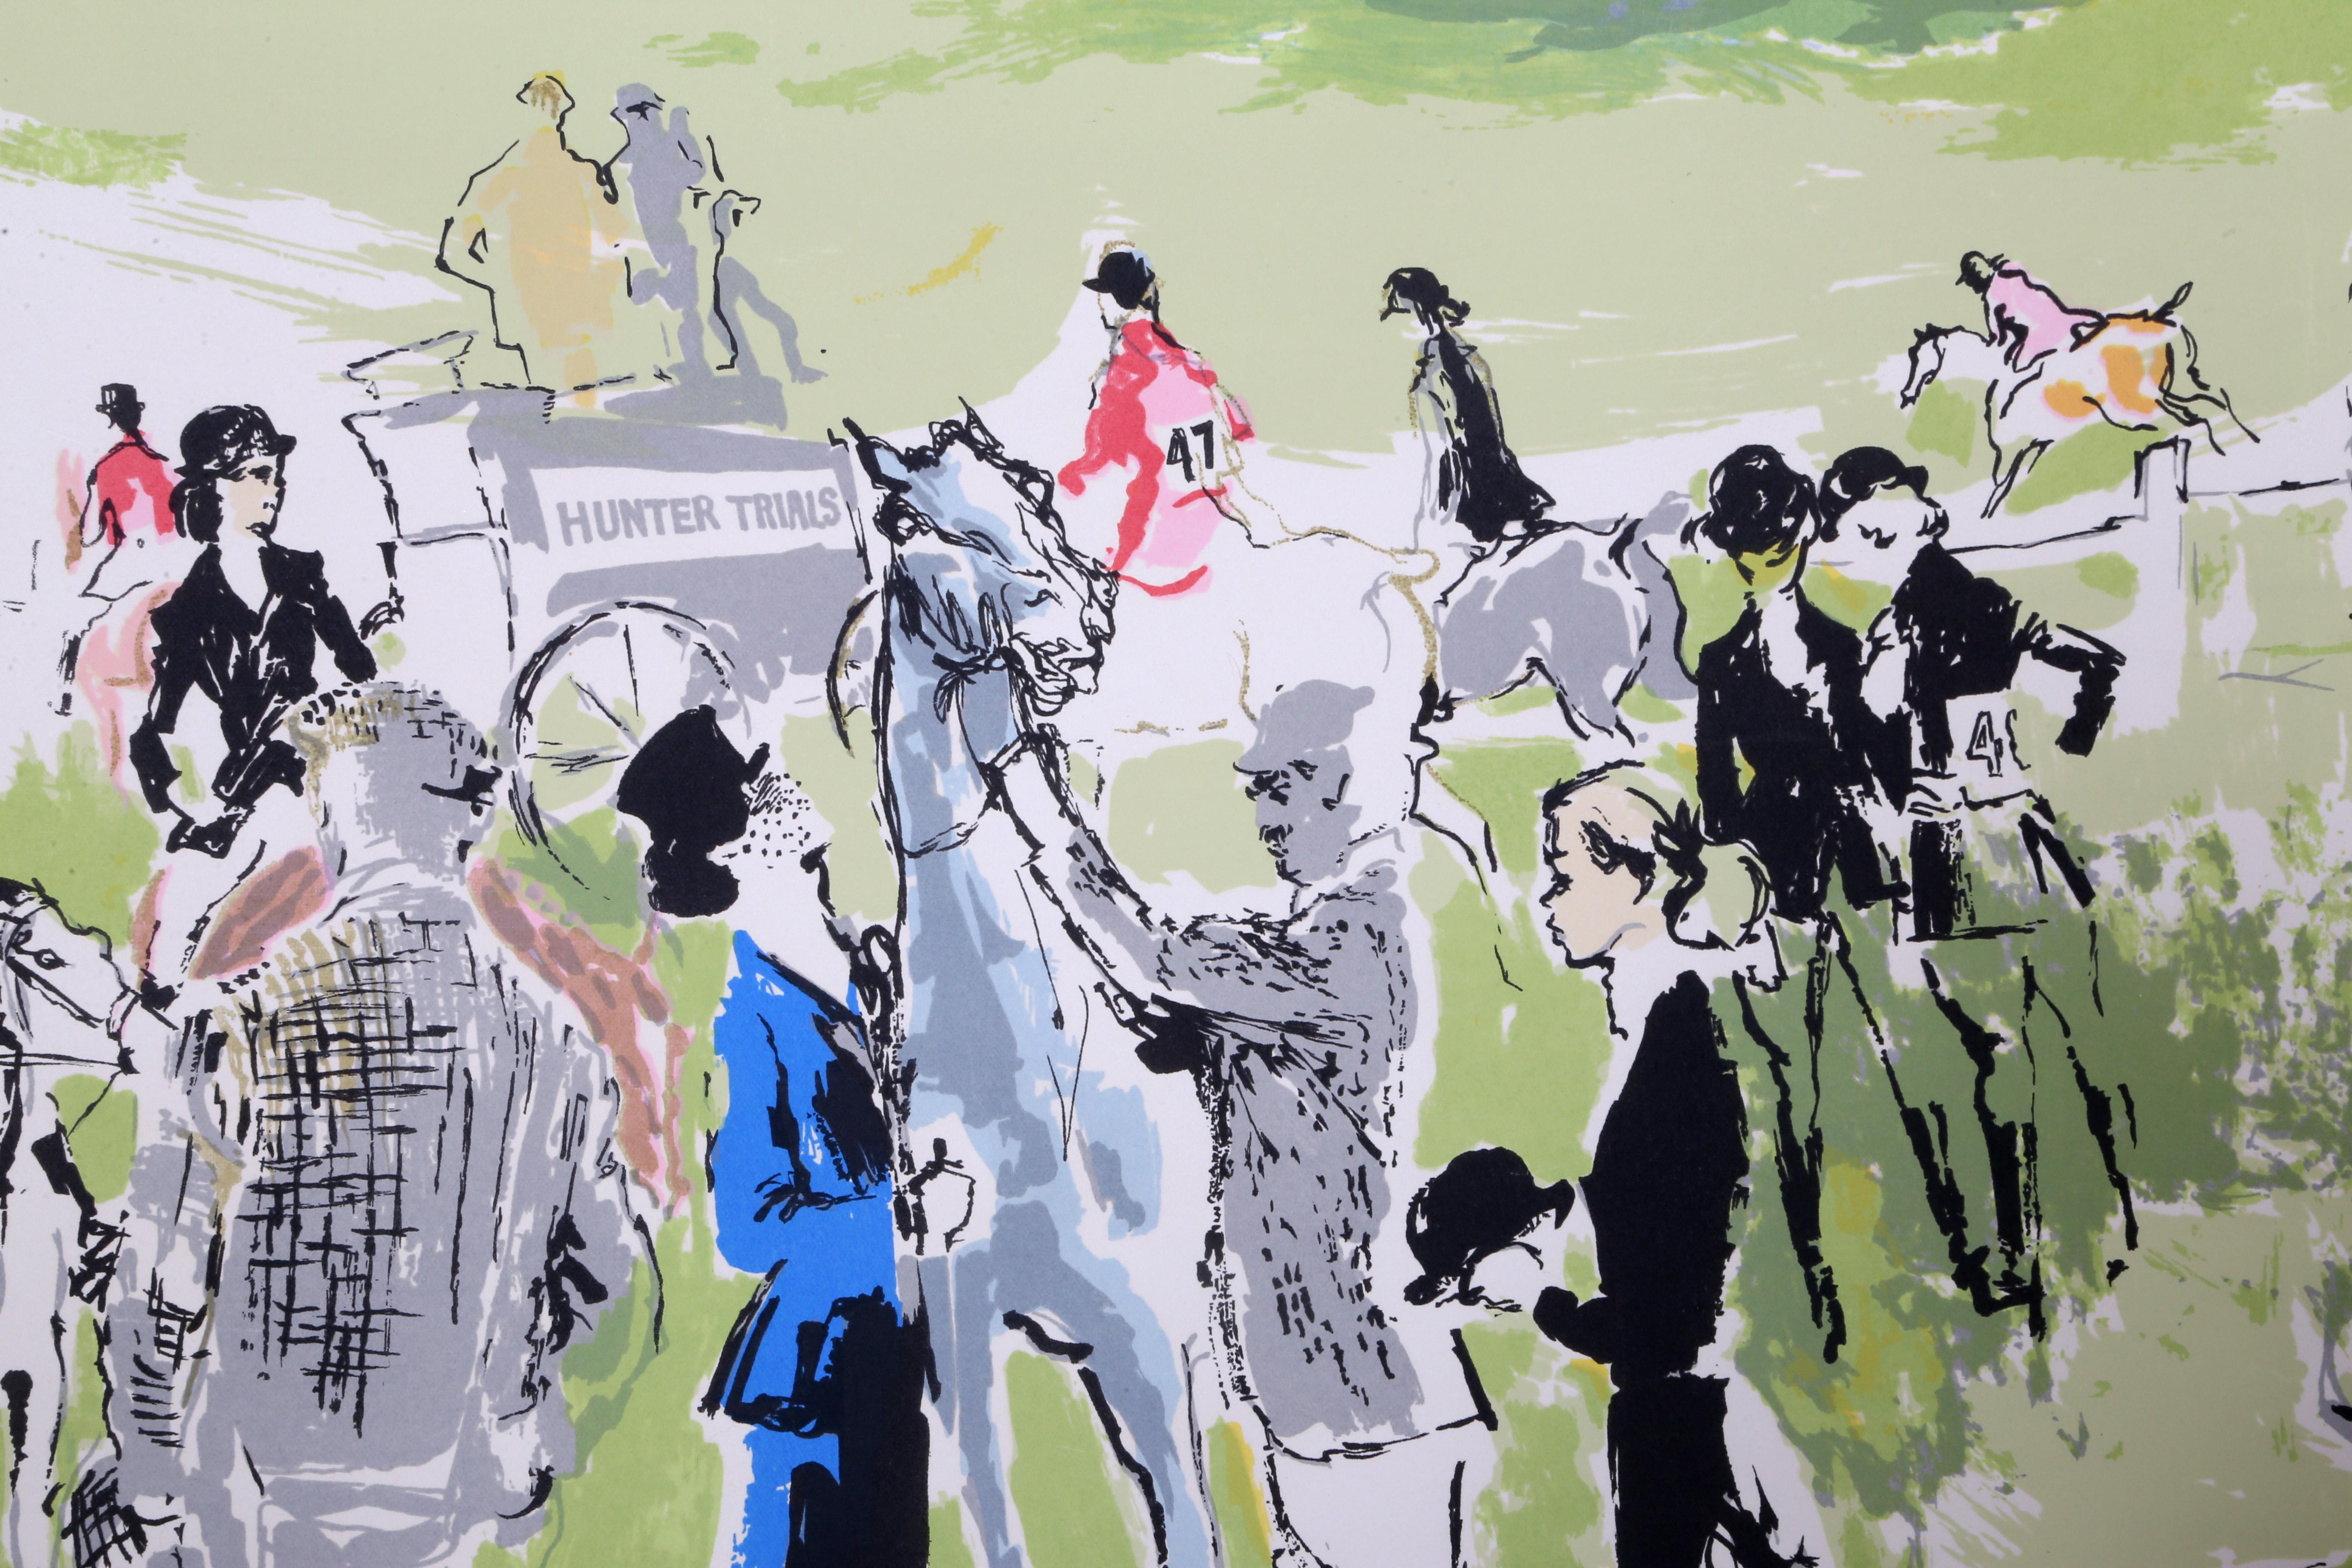 Hunter Trials, Lithograph by LeRoy Neiman - Print by Leroy Neiman